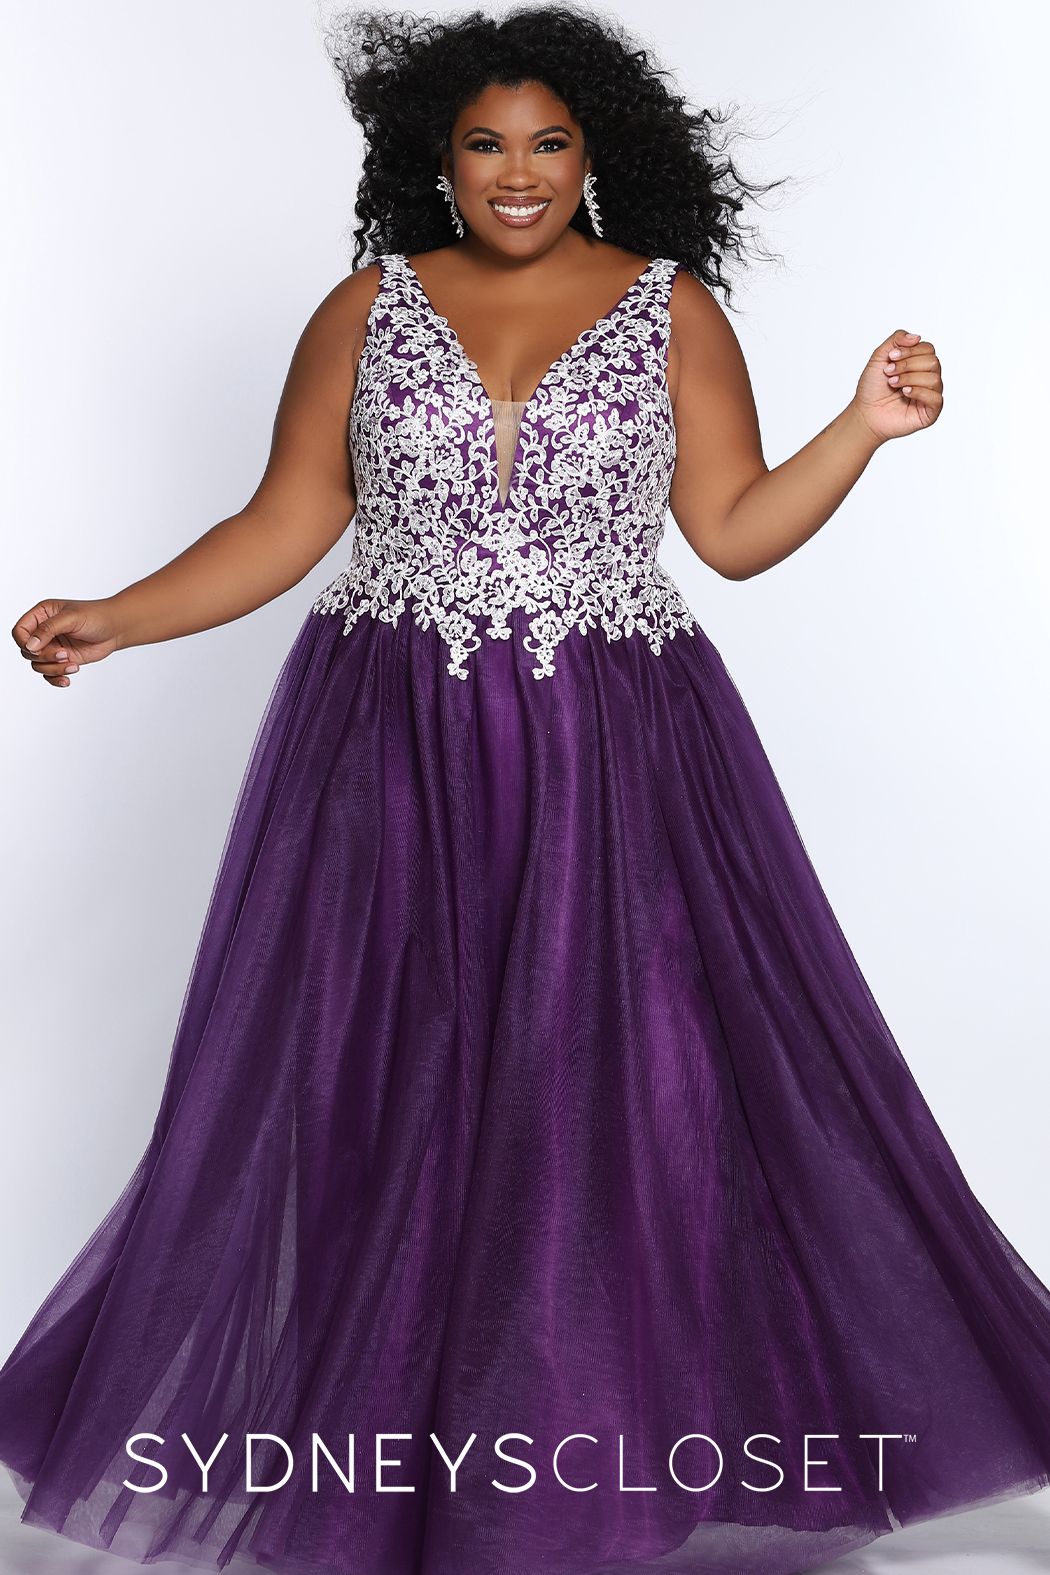 Sydney's Closet 7291 V neckline wide straps lace bodice corset back long tulle ball gown prom dress plus size evening gown   Available colors:  Cherry, Navy, Black, Plum, Light Blue  Available sizes:  14, 16, 18, 20, 22, 24, 26, 28, 30, 32, 34, 36